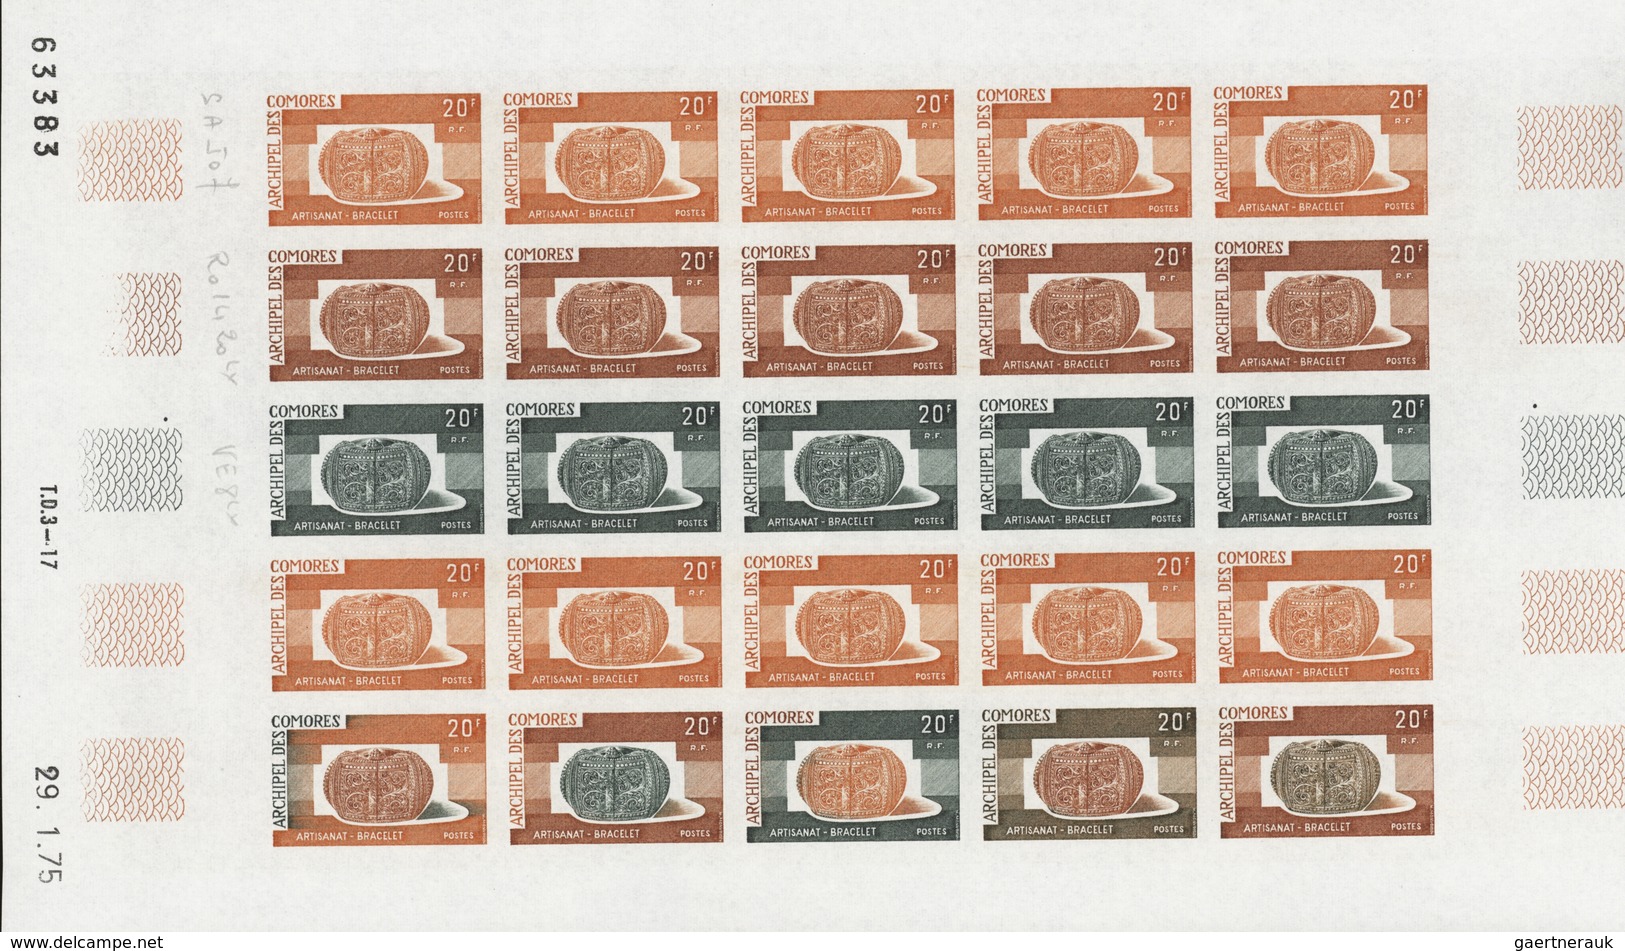 Komoren: 1970/1975, IMPERFORATE COLOUR PROOFS, MNH collection of 31 complete sheets (=690 proofs), o